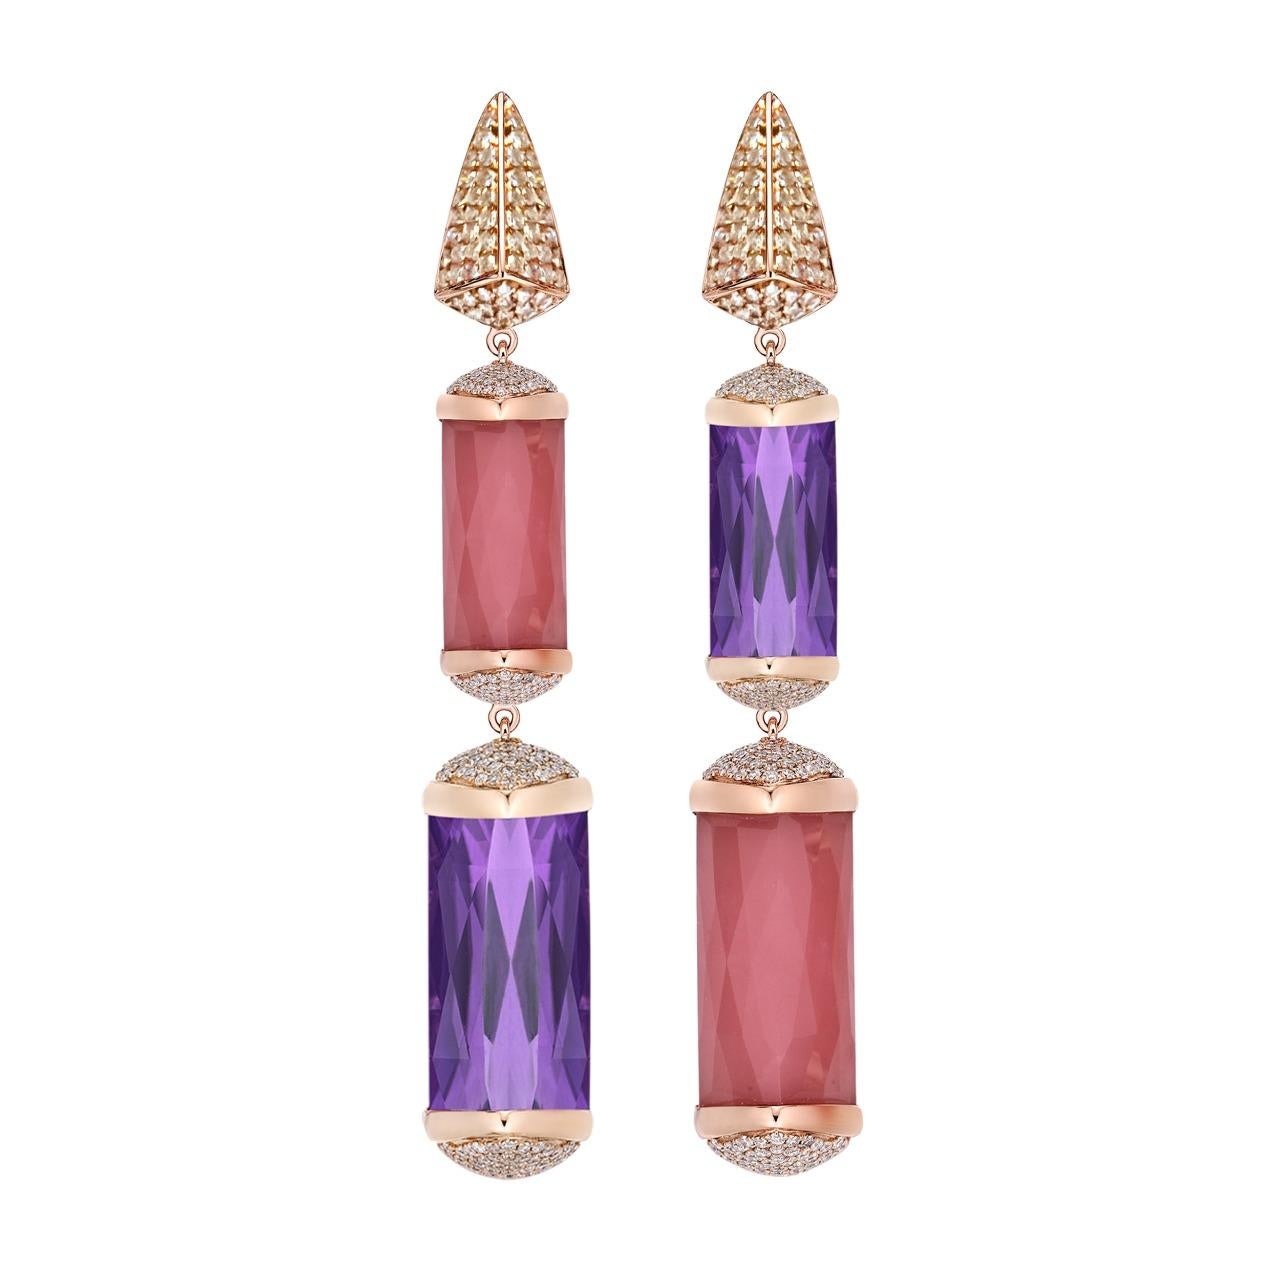 Happy Moods Collection -  this particular collection uses a vibrant variety of color gemstones to reflect the different feelings of happiness. Presenting our unique mismatch gemstone earrings perfect for winter evenings featuring Guava Quartz and